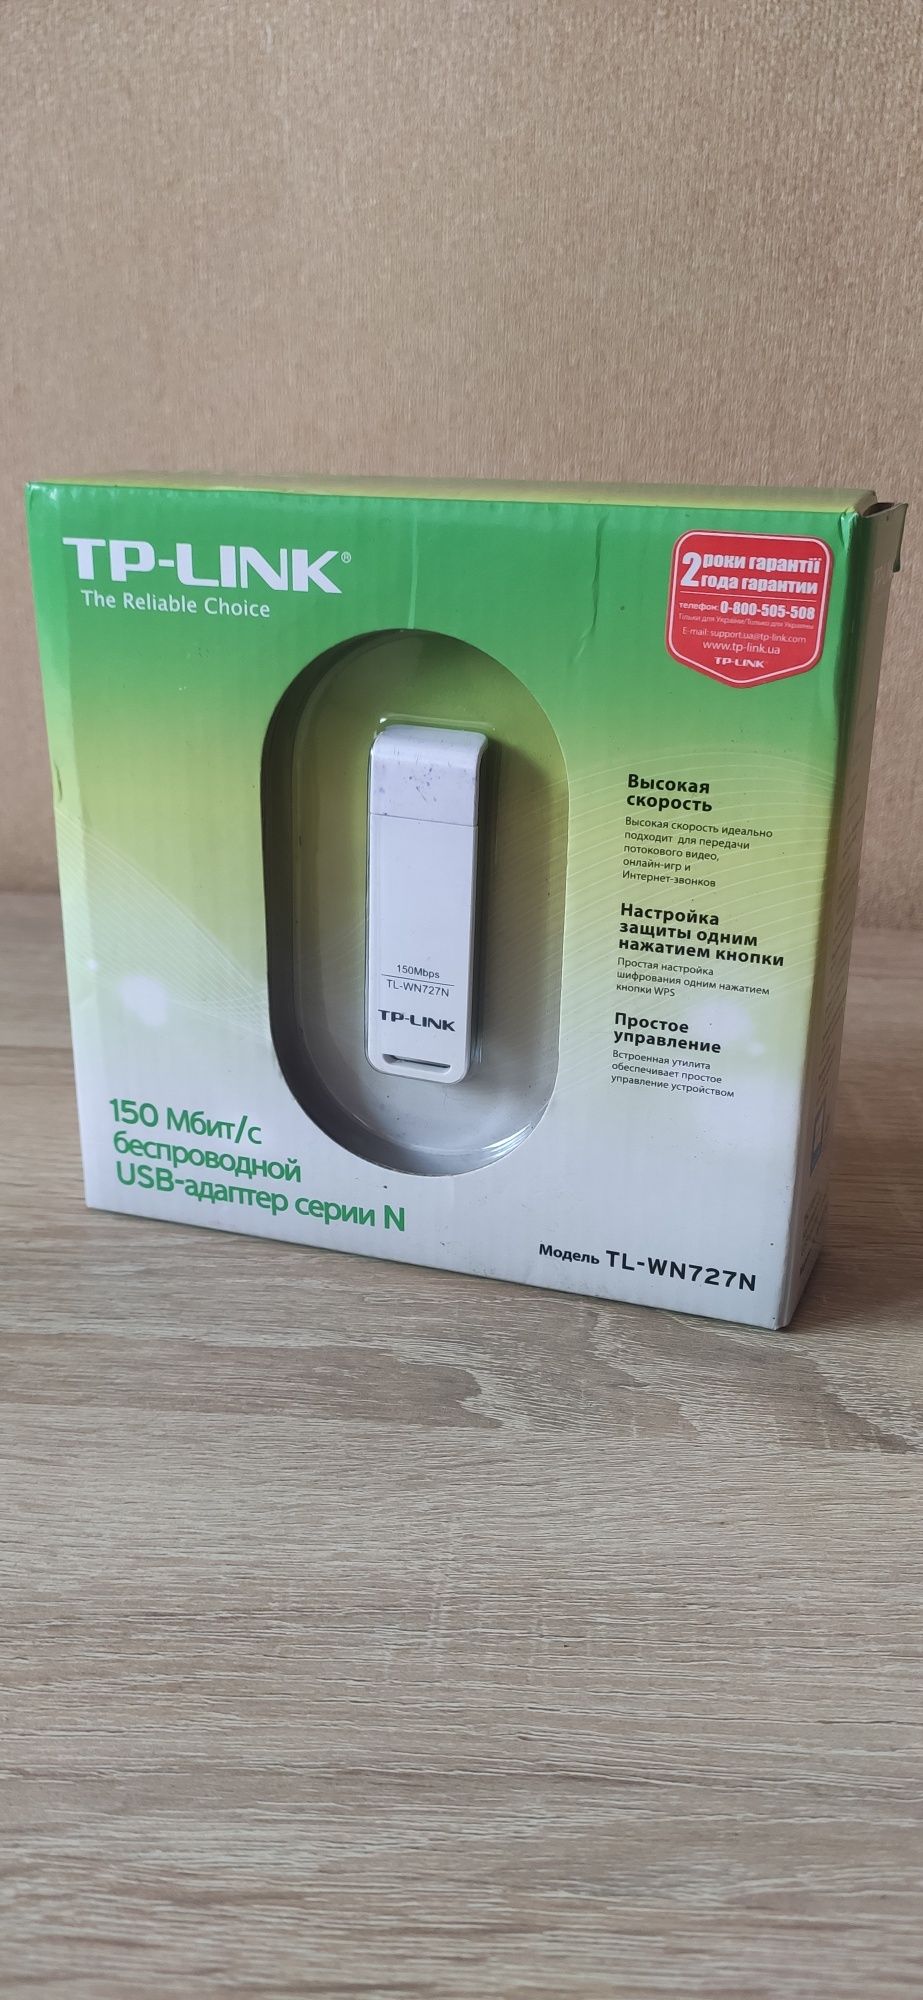 Wi-fi aдаптер TP-LINK 150Мб/с